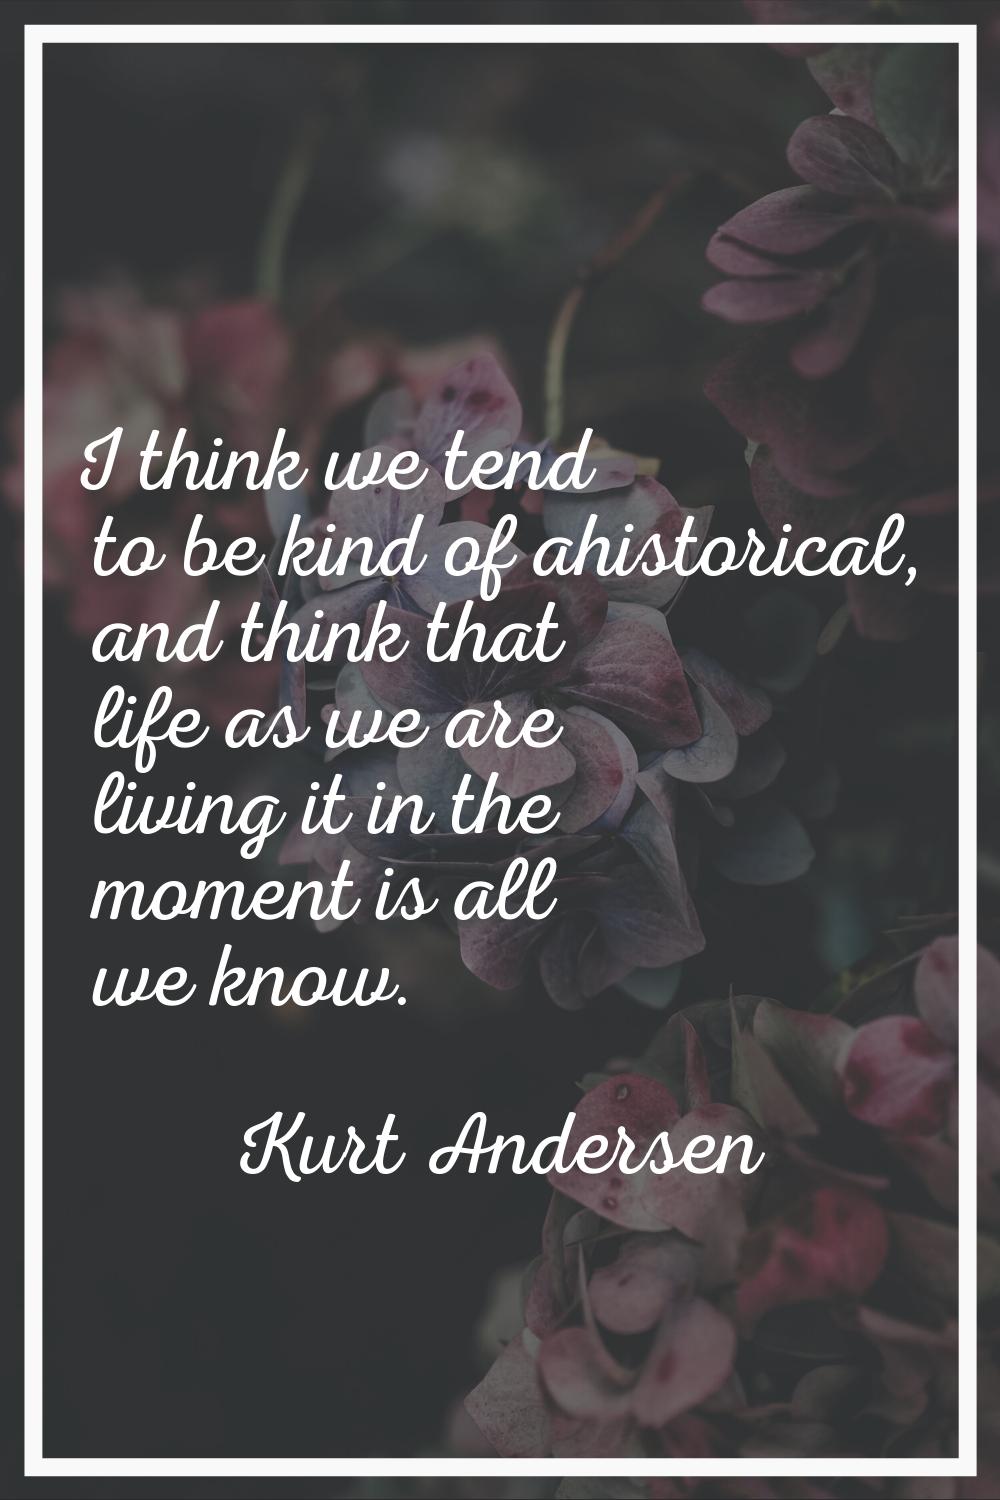 I think we tend to be kind of ahistorical, and think that life as we are living it in the moment is